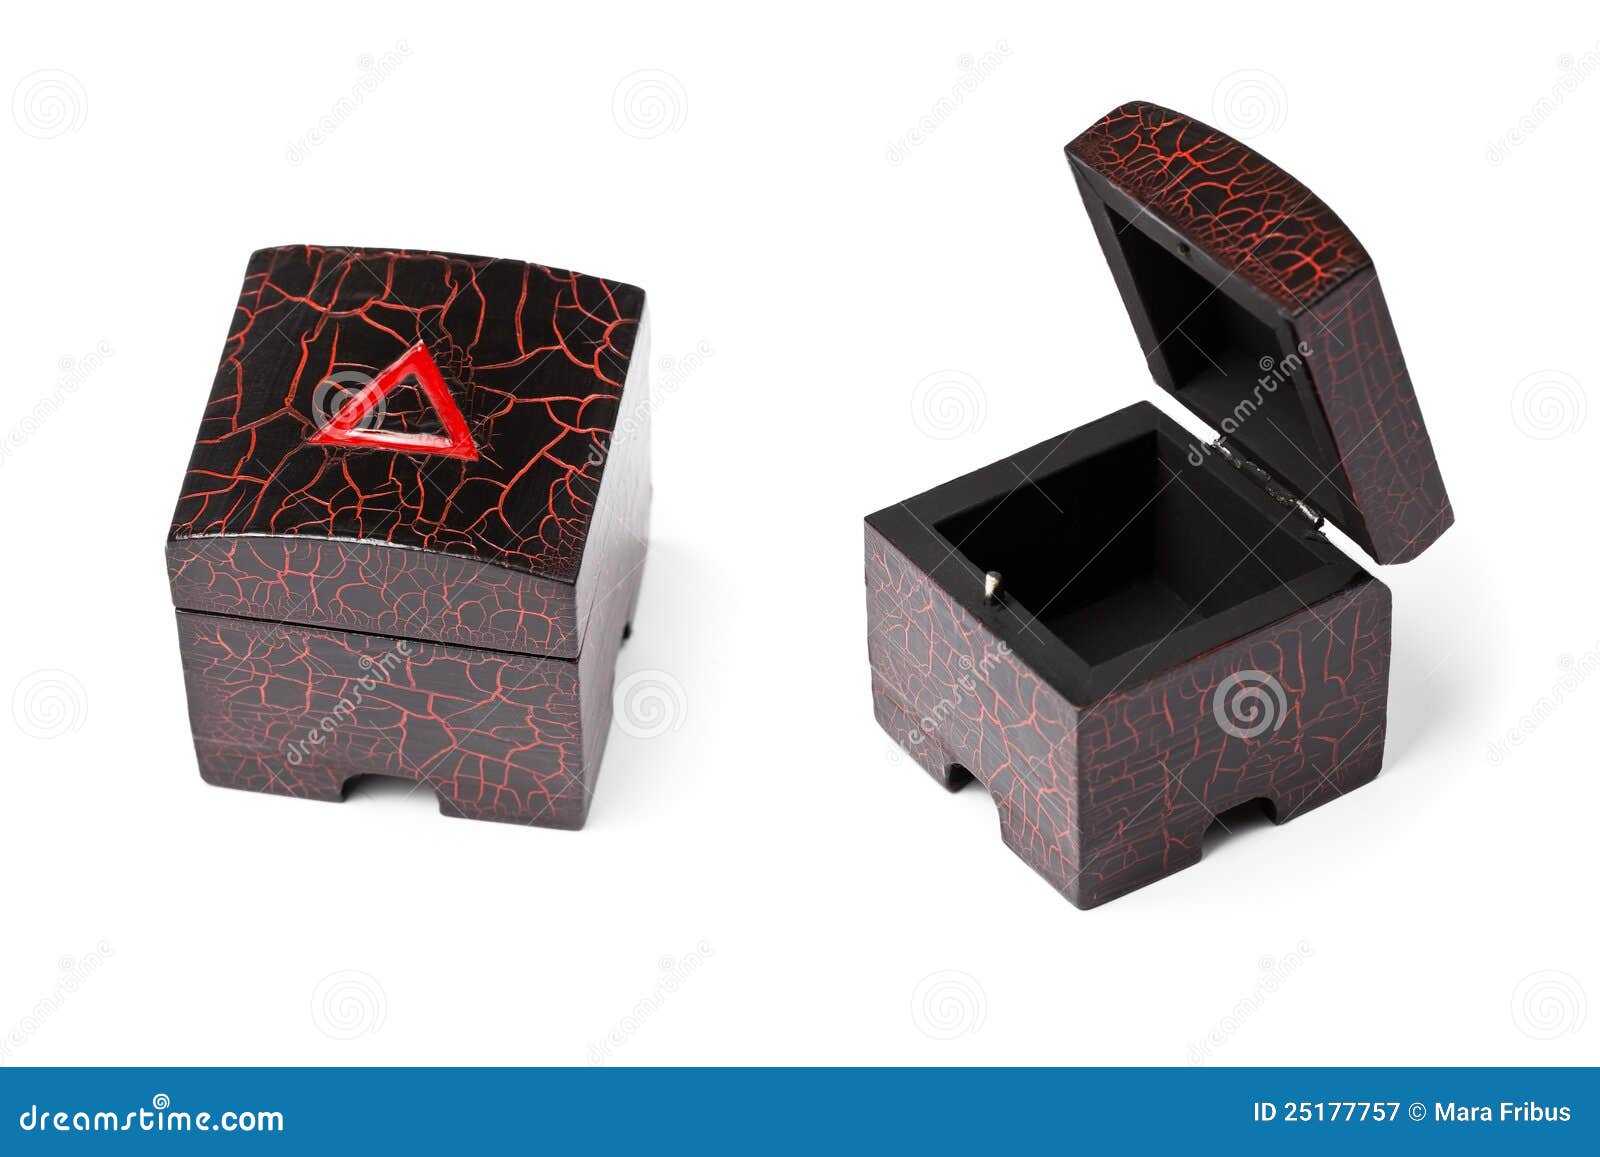 Handmade little black and red wooden boxes, opened and closed, on 